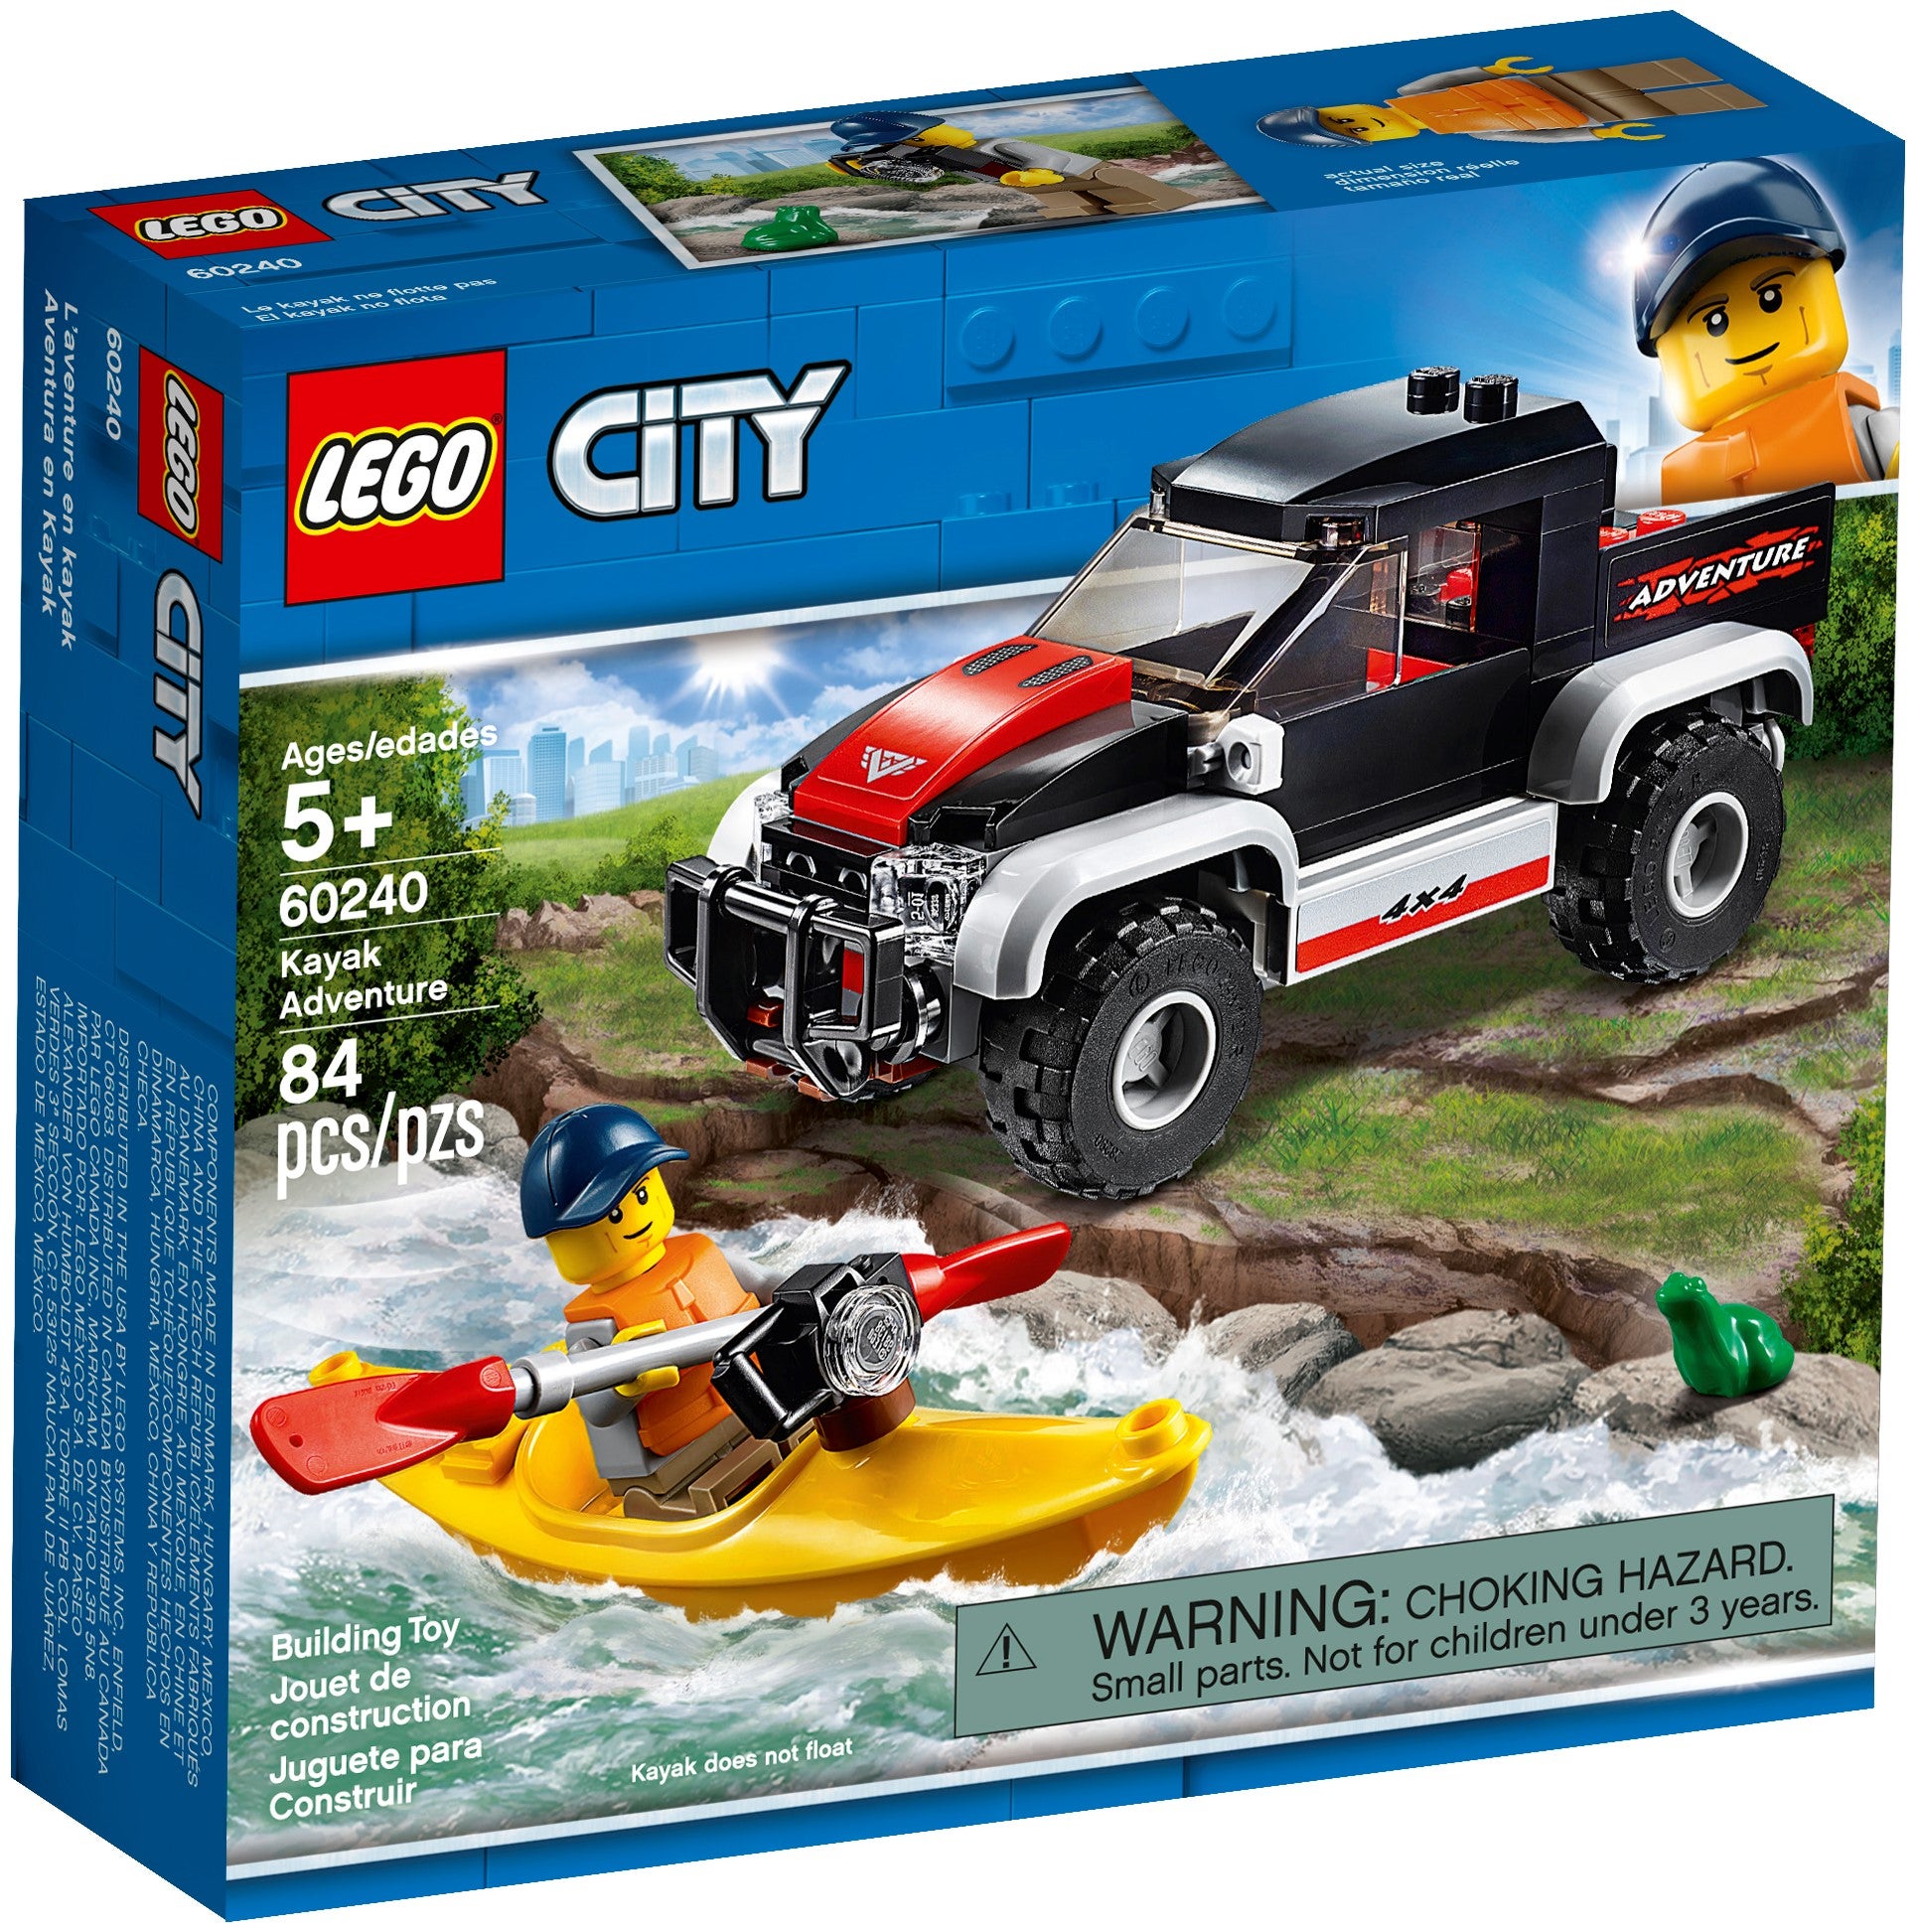 New Release for 2019! 60240 LEGO CITY Kayak Adventure 84 Pieces Age 5 